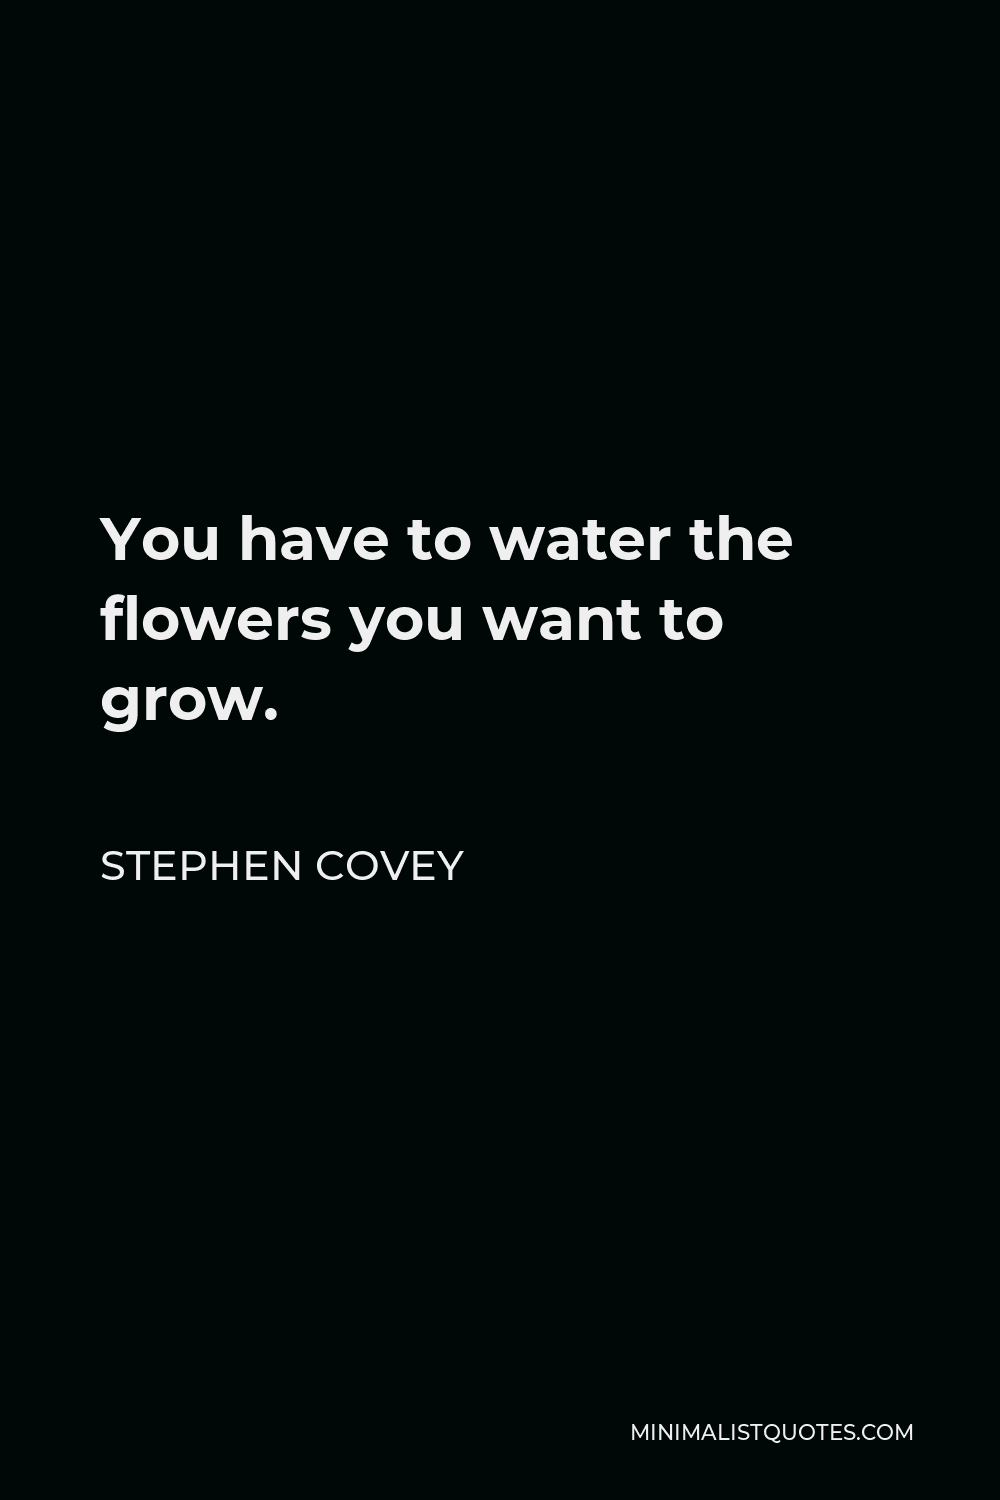 Stephen Covey Quote - You have to water the flowers you want to grow.